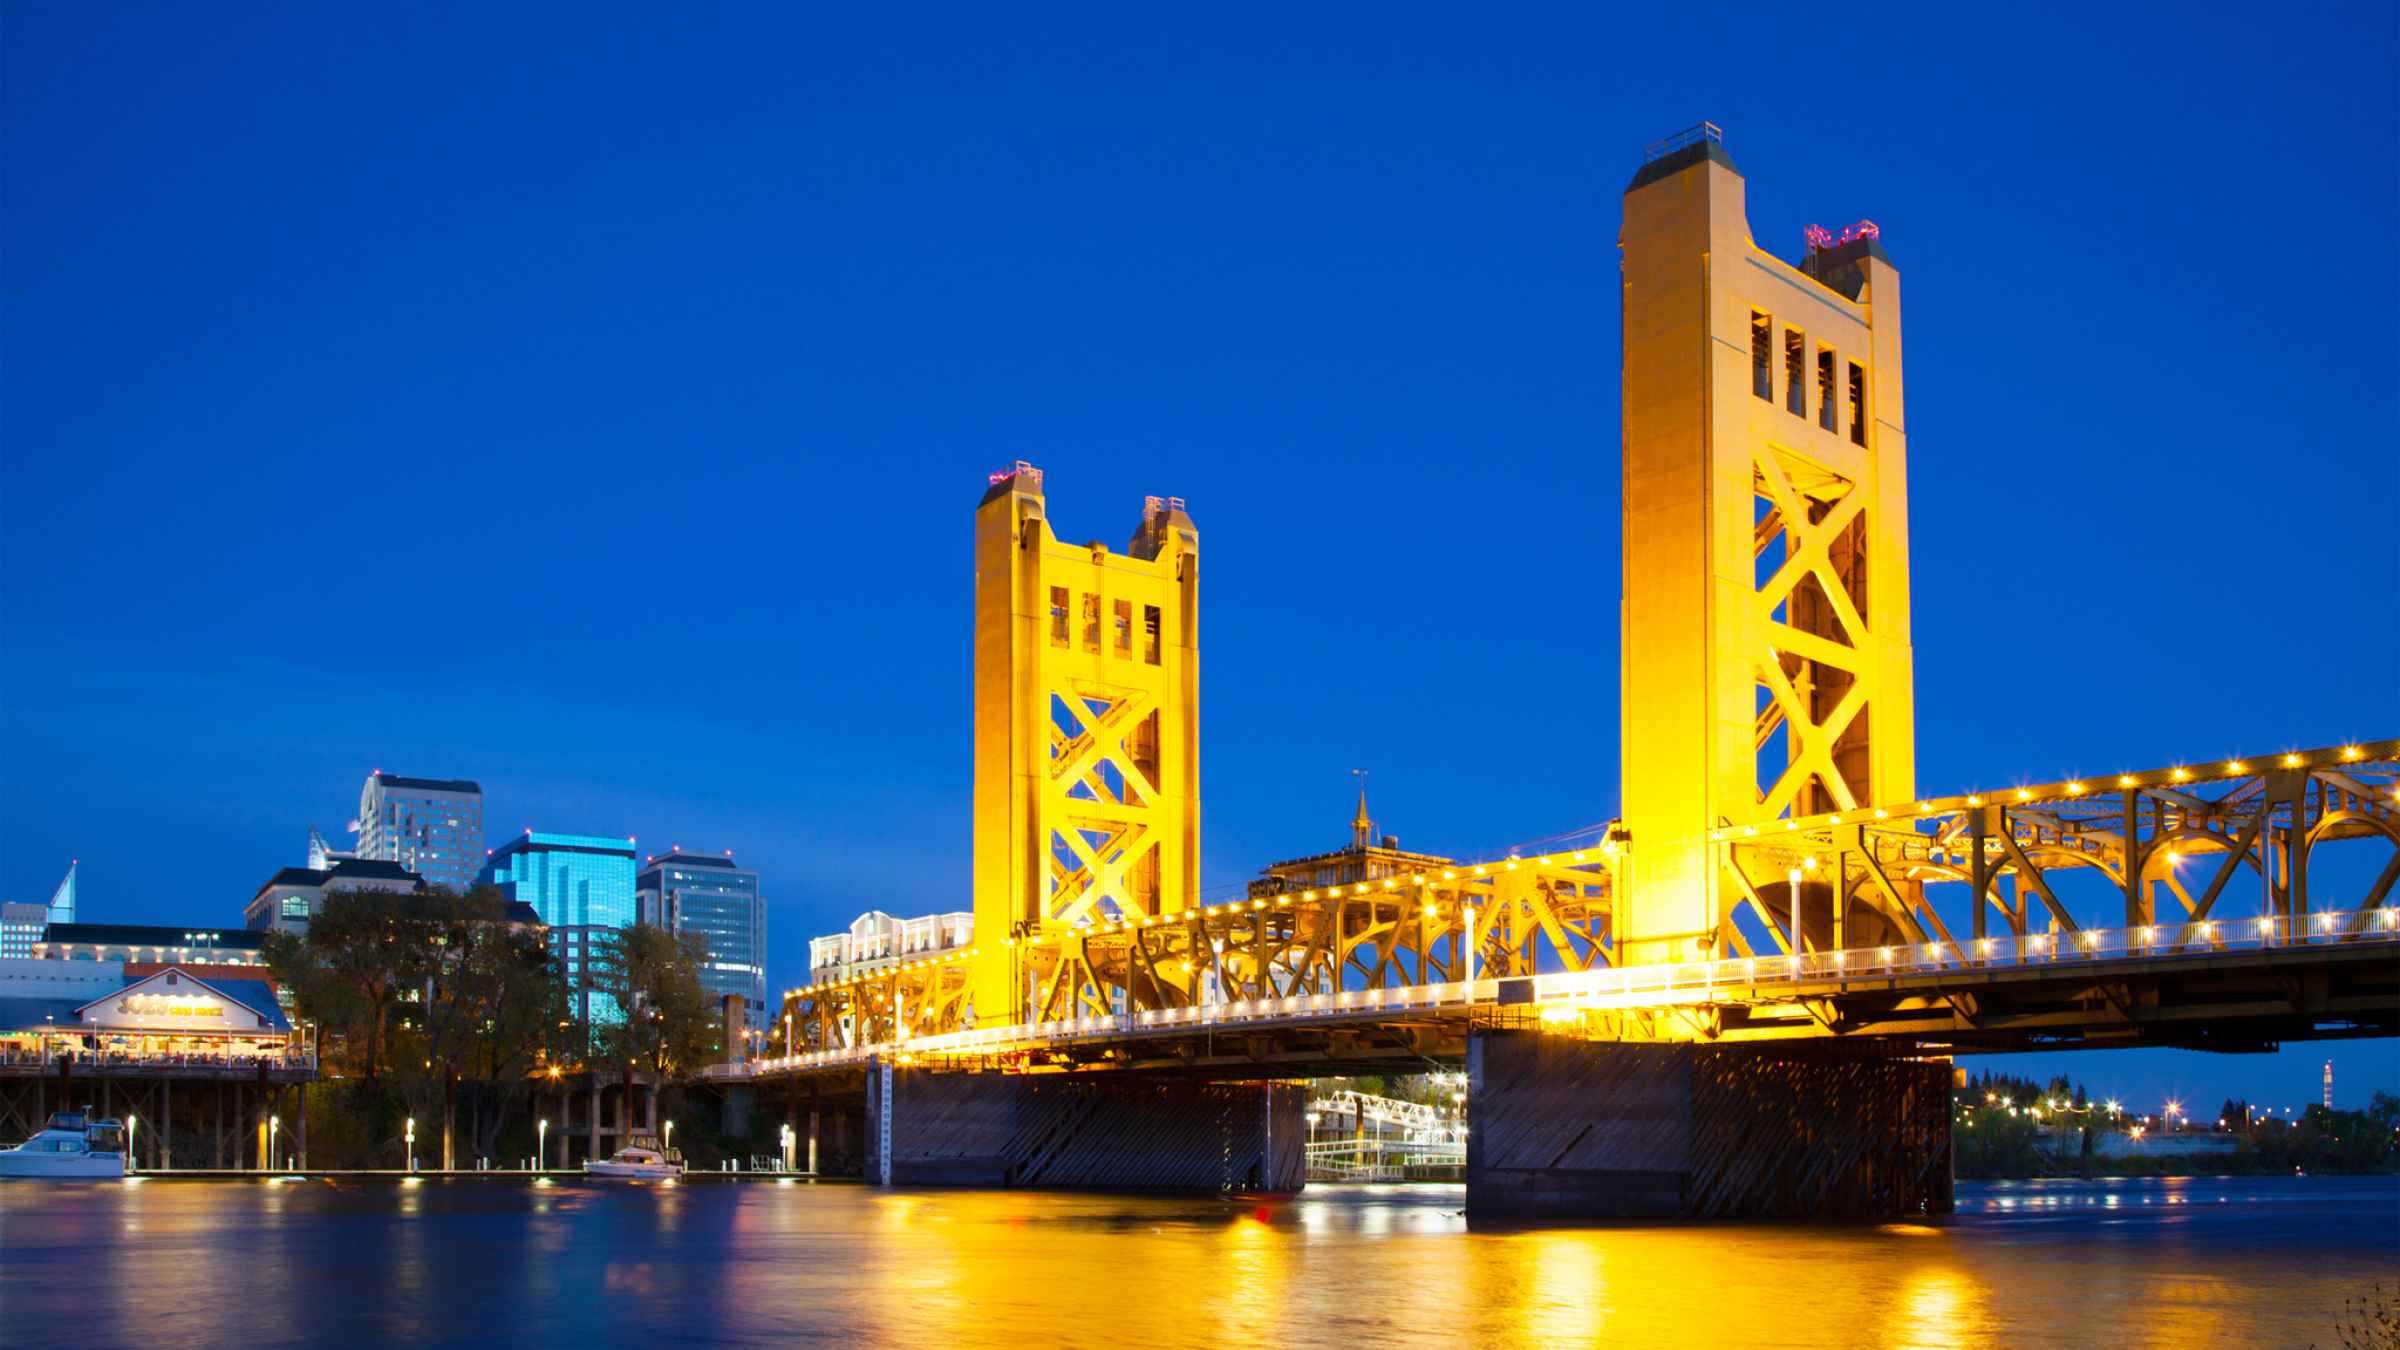 Sacramento 2021: Top 10 Tours & Activities (with Photos) - Things to Do